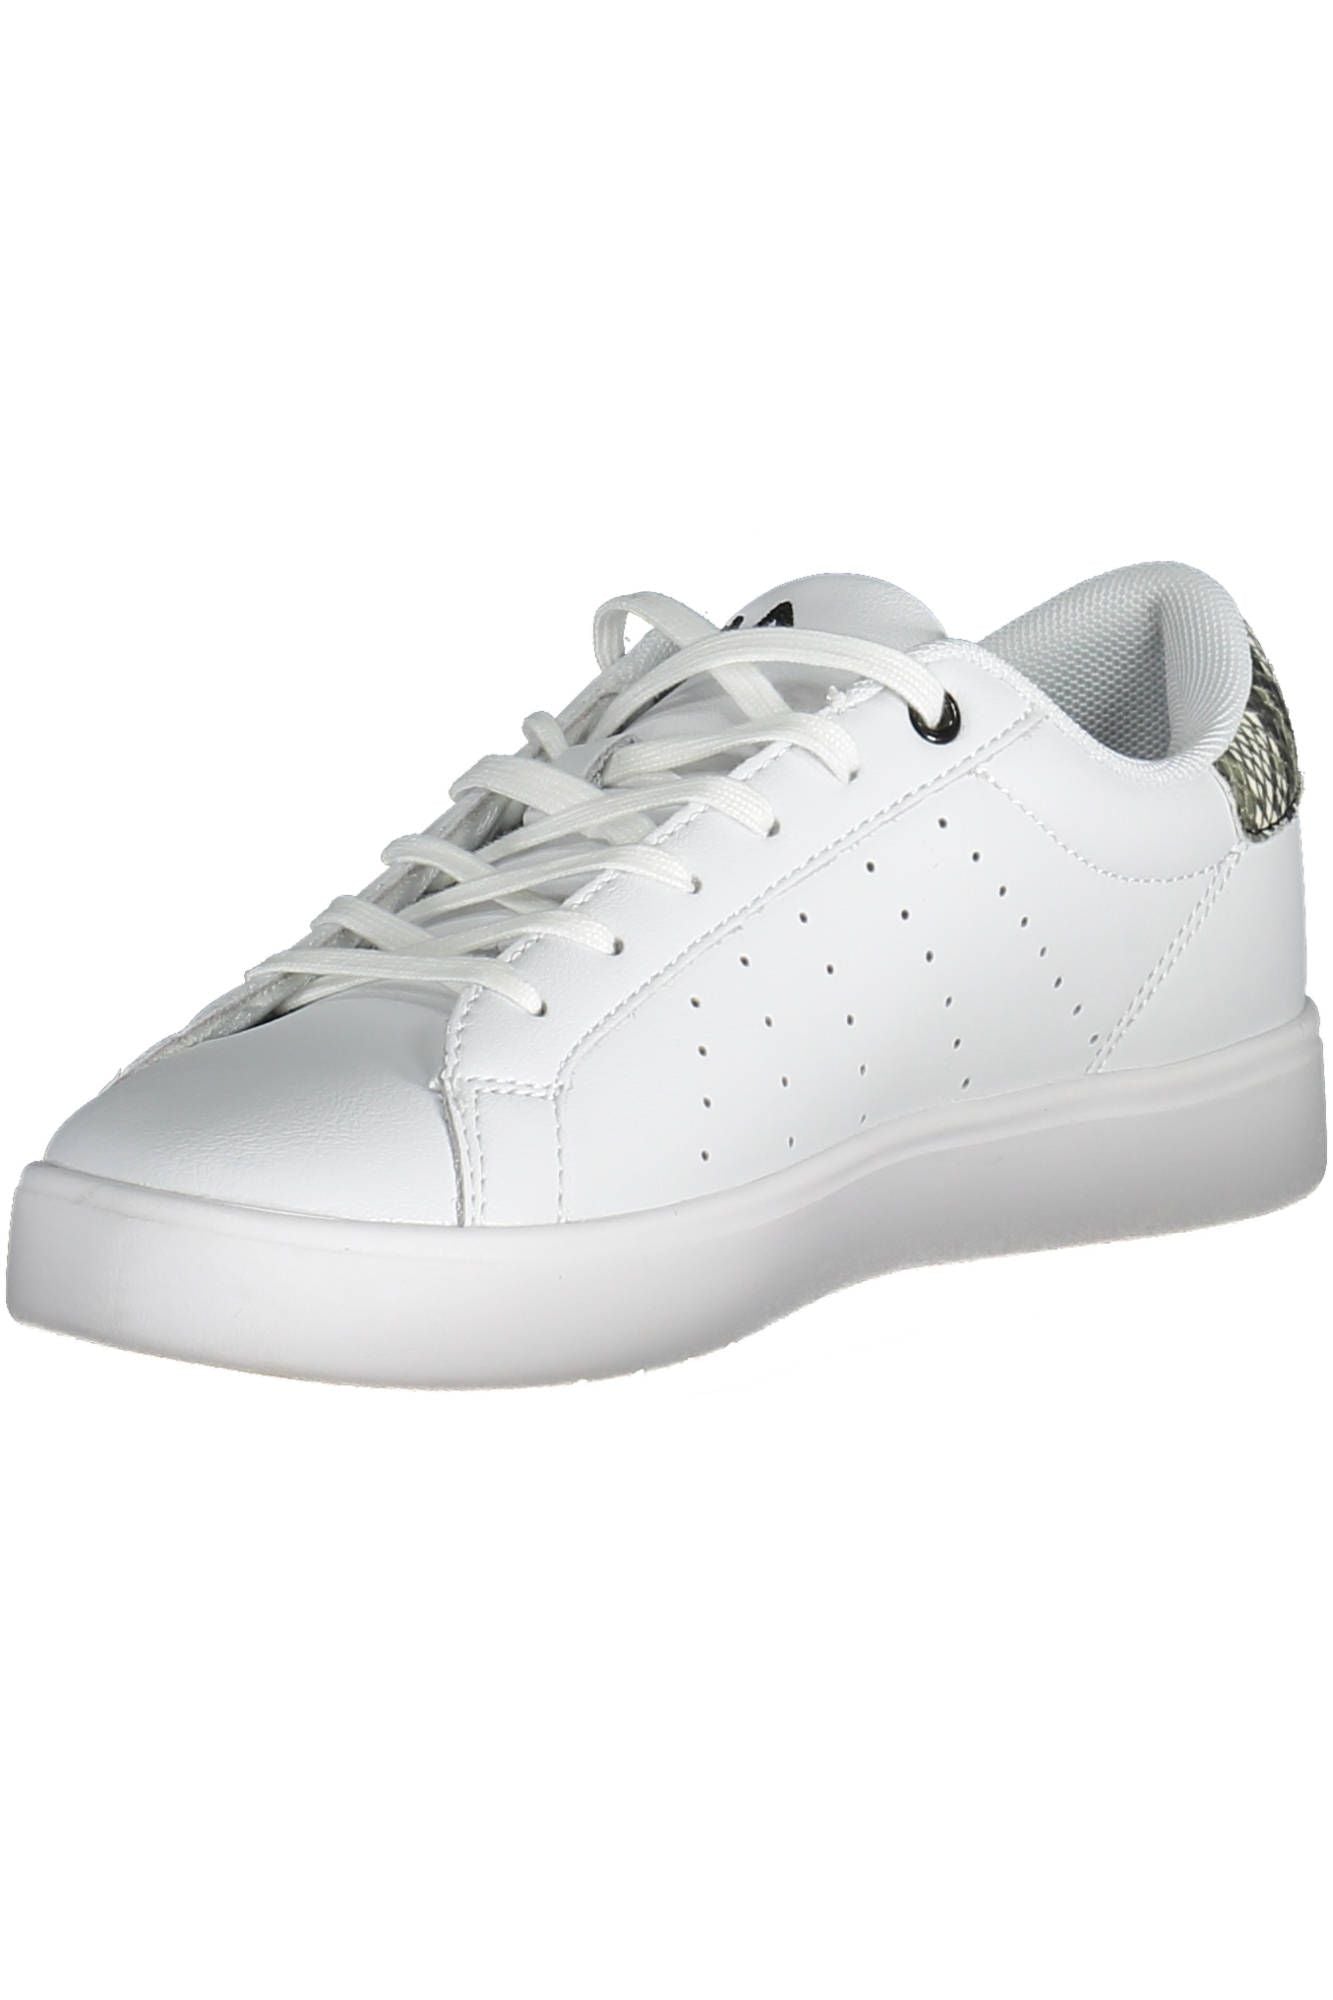 Chic White Sports Sneakers with Contrasting Details